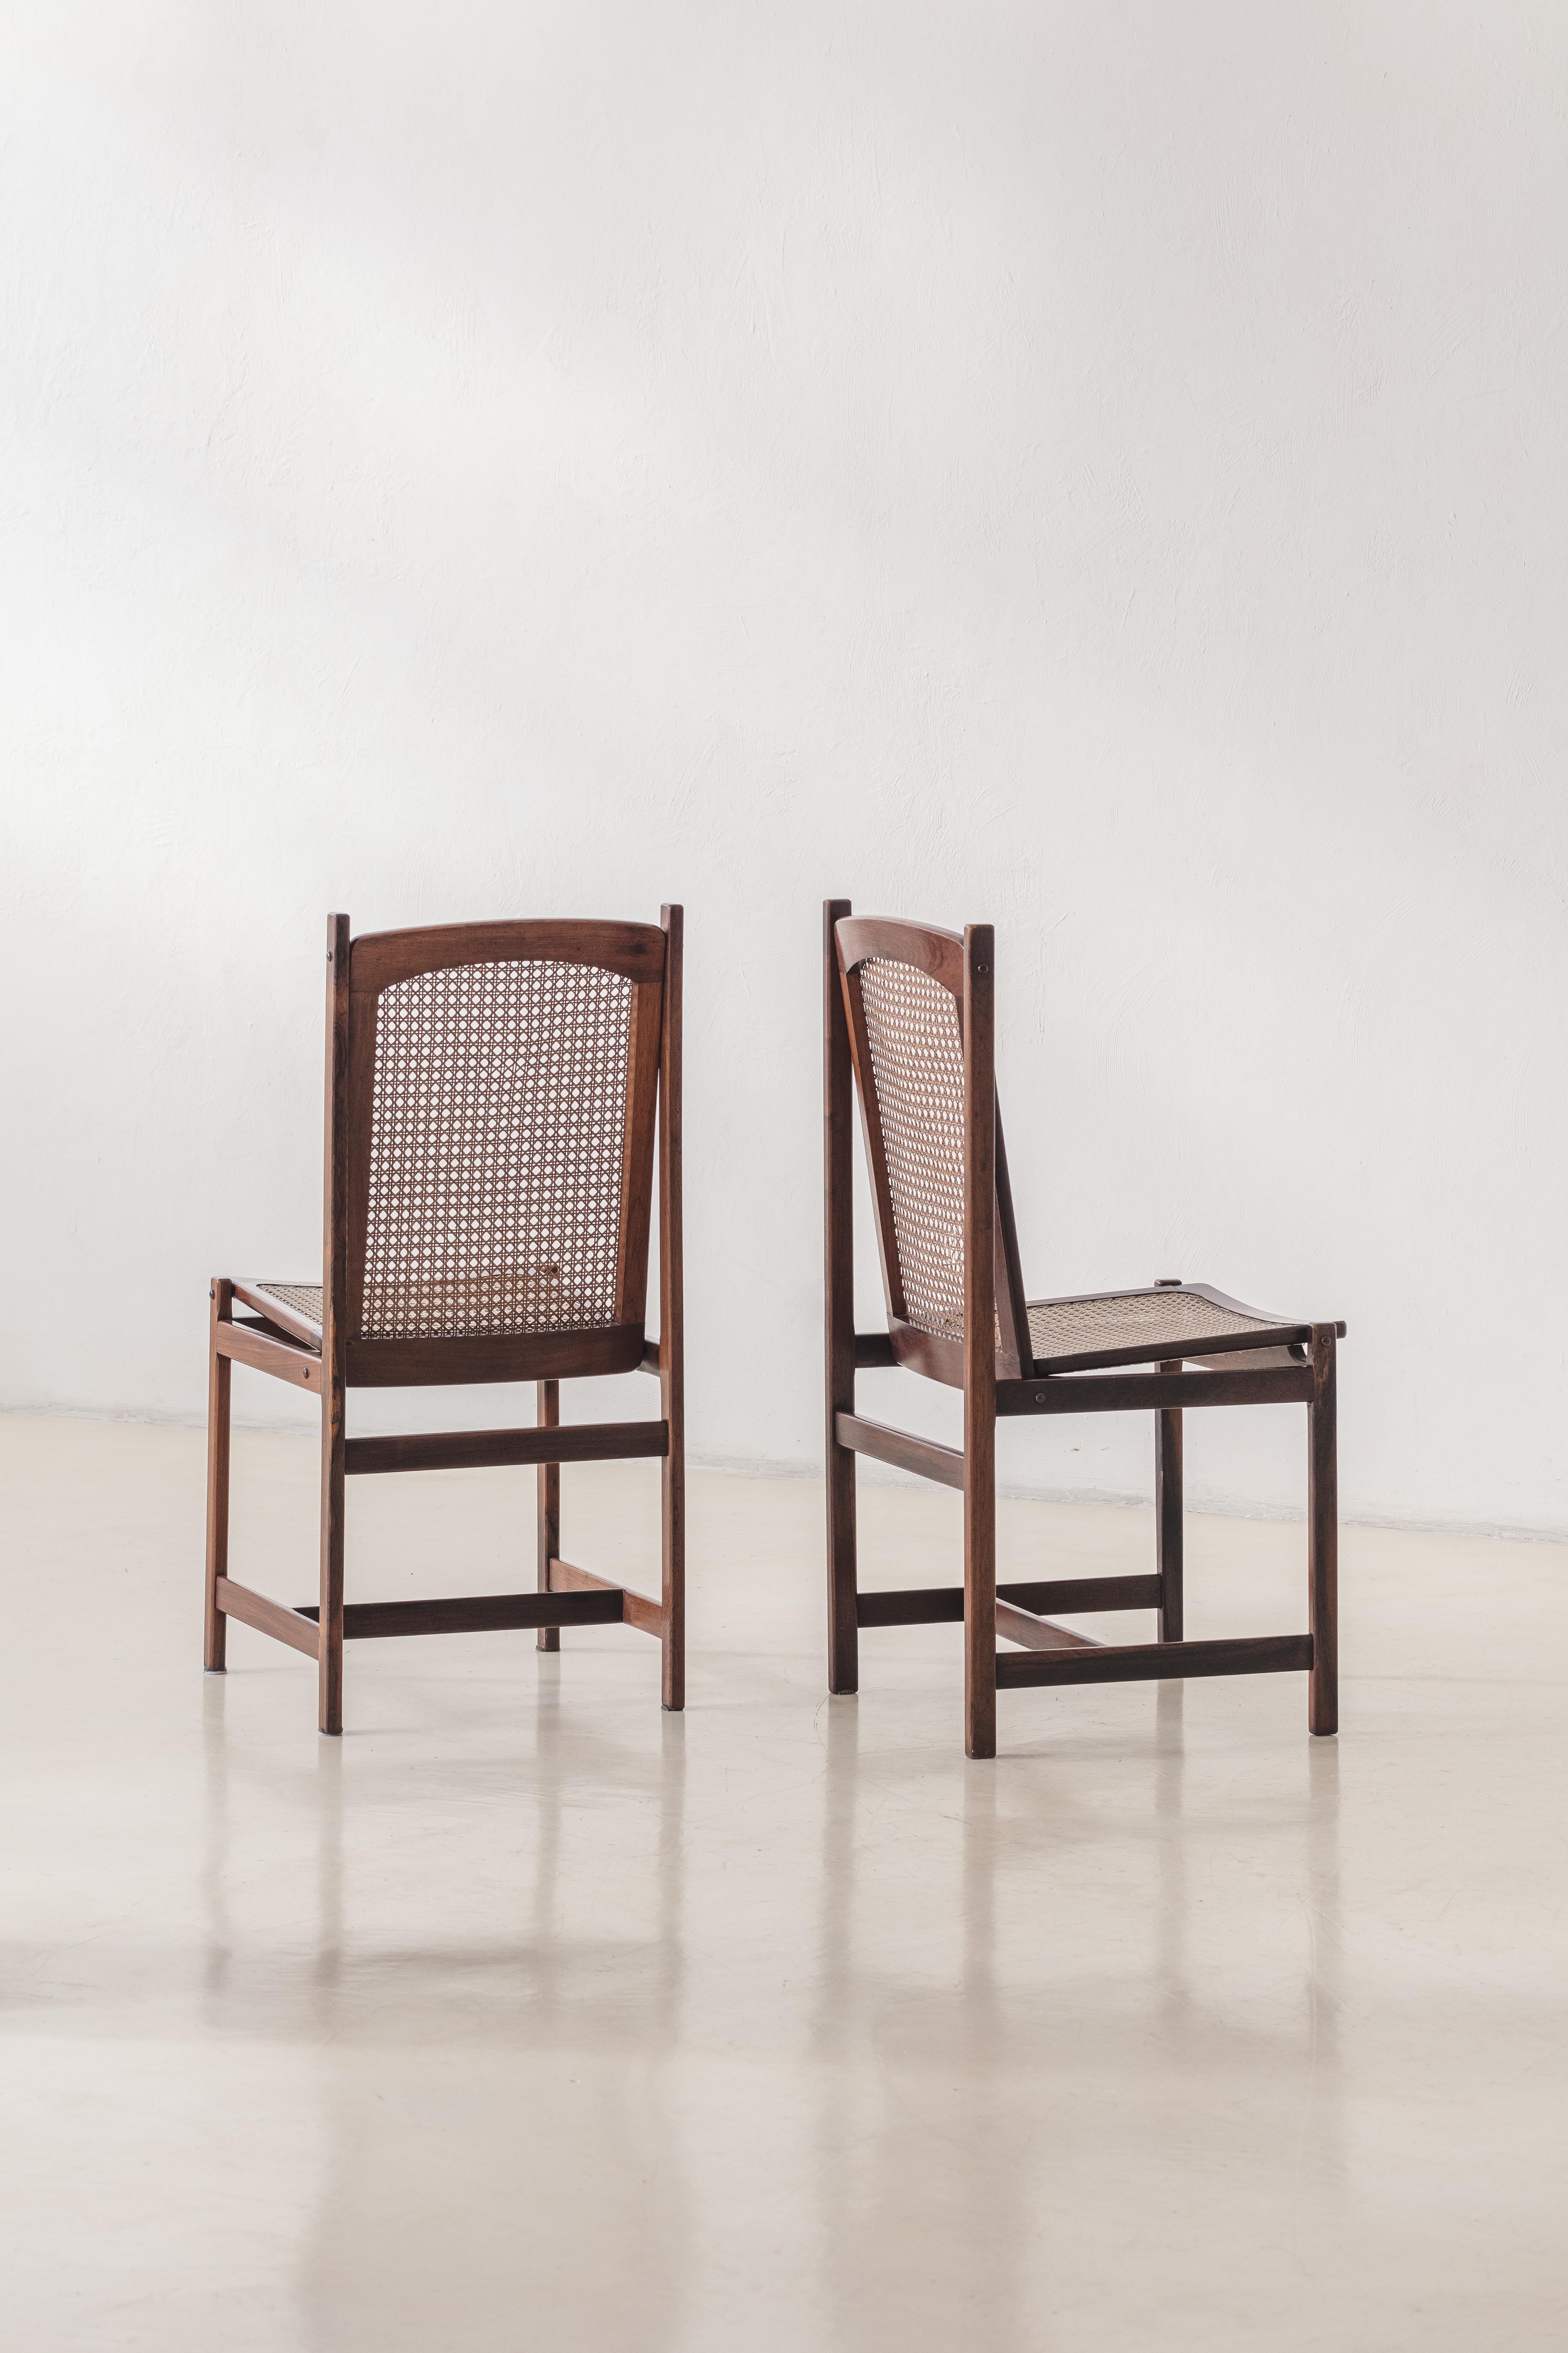 Celina Decorações Set of Six Dining Chairs, Rosewood and Cane, Midcentury 1960s For Sale 3